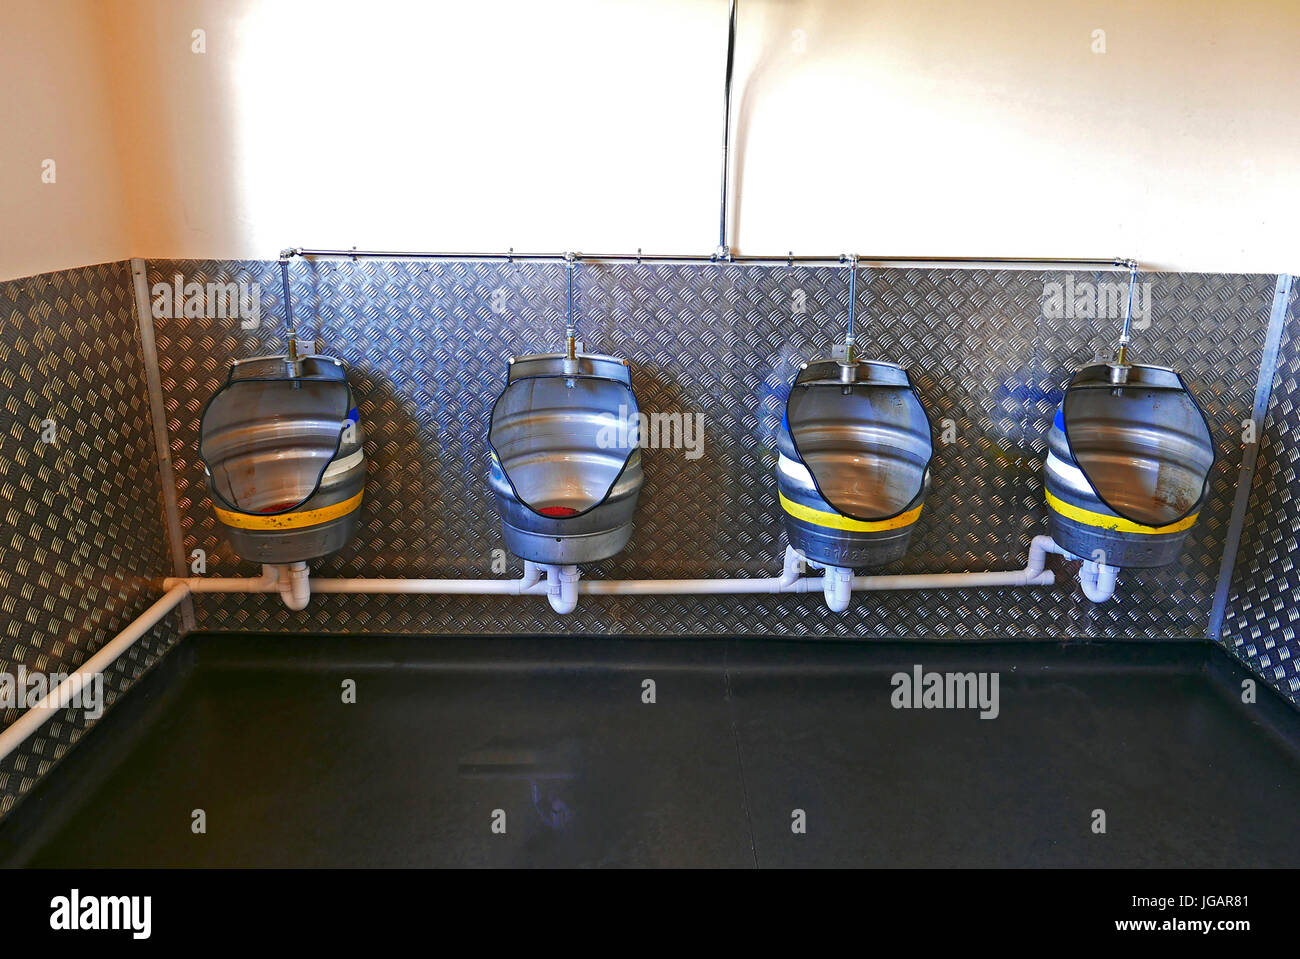 Gents urinals made from old recycled beer barrels Stock Photo